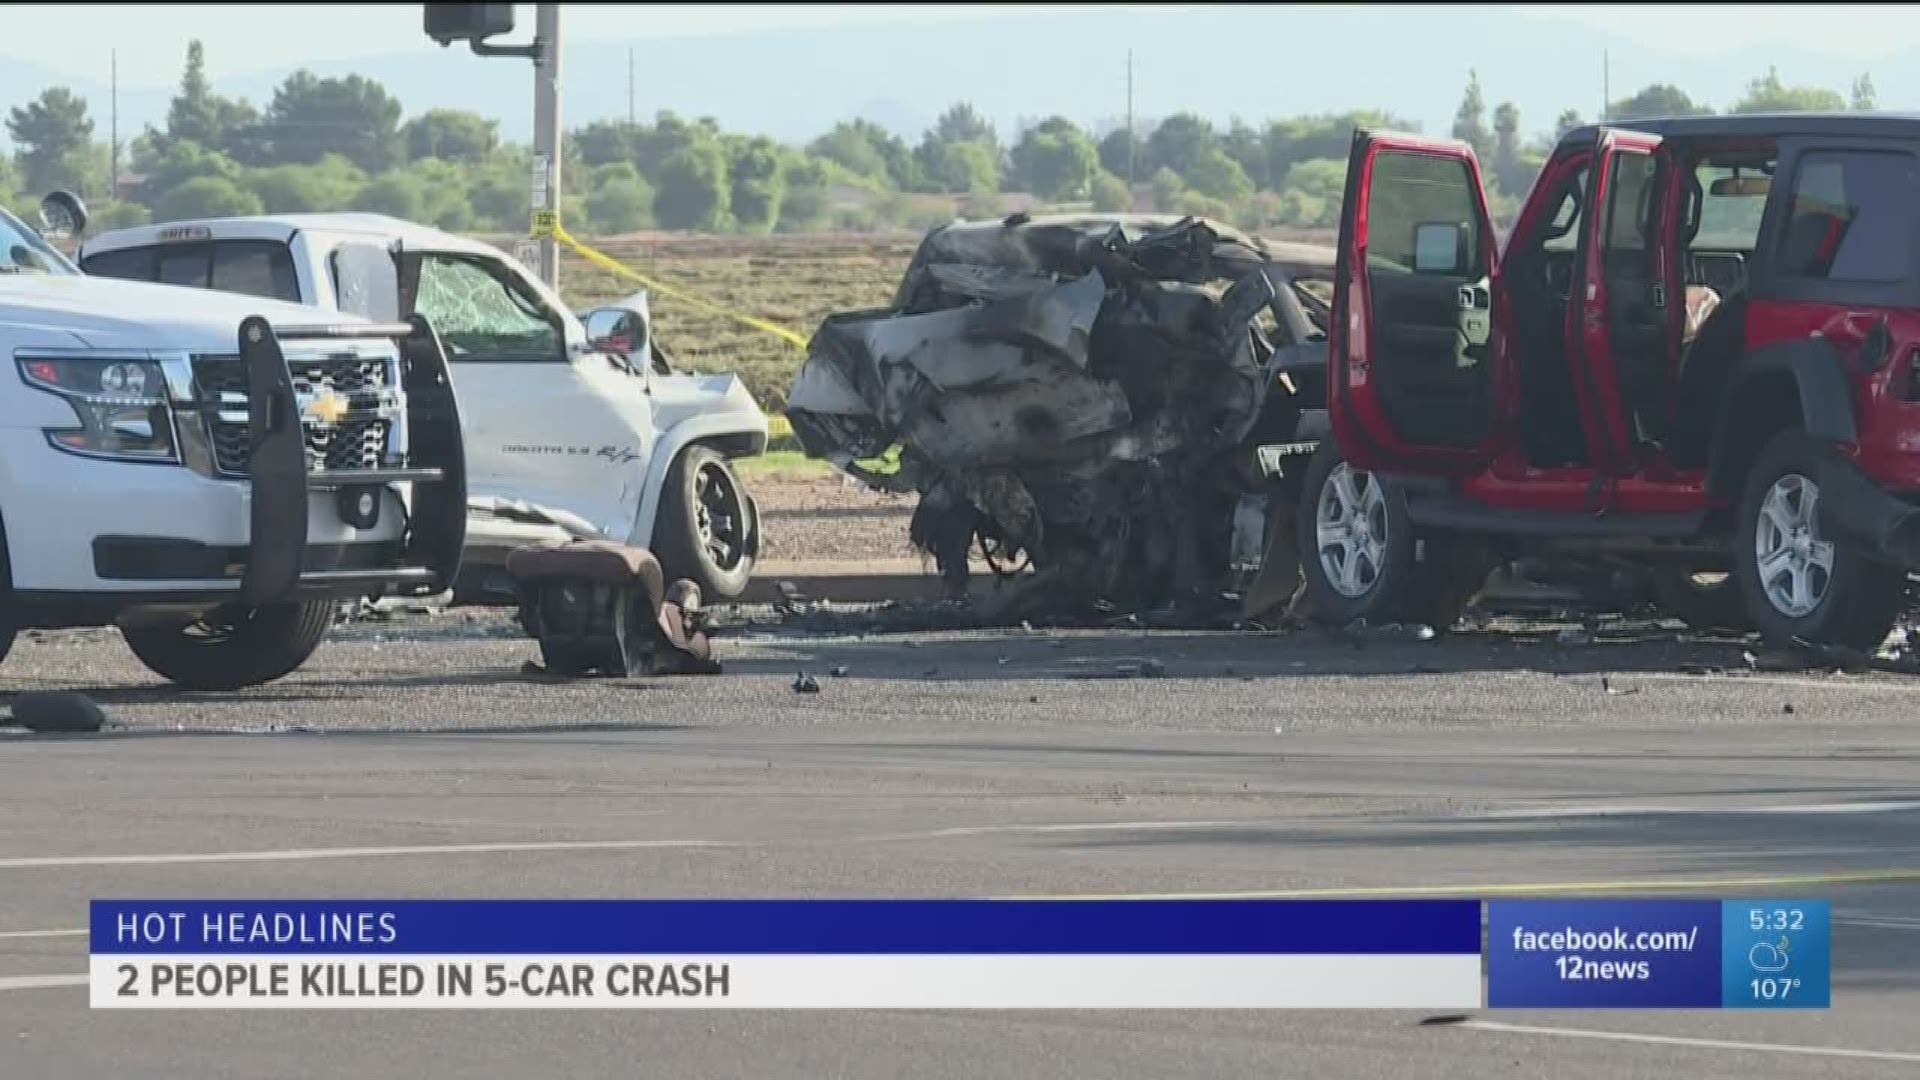 Police in Glendale say the collision occurred about 2:45 a.m. Sunday at the intersection of 91st Avenue and Camelback Road and investigators are trying to determine if speed or impairment was a factor.